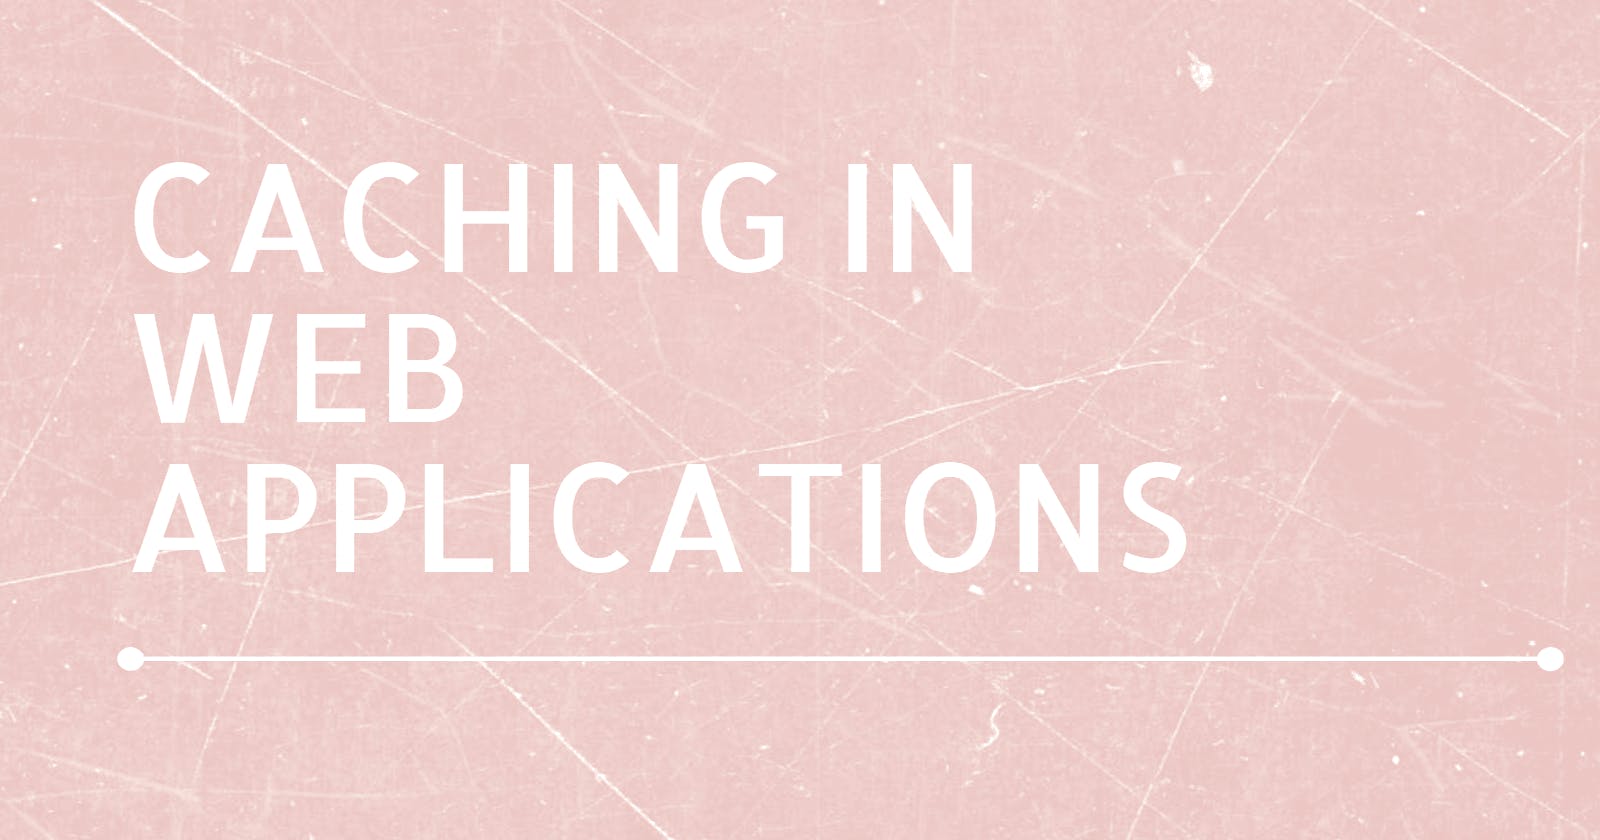 Caching in Web Applications